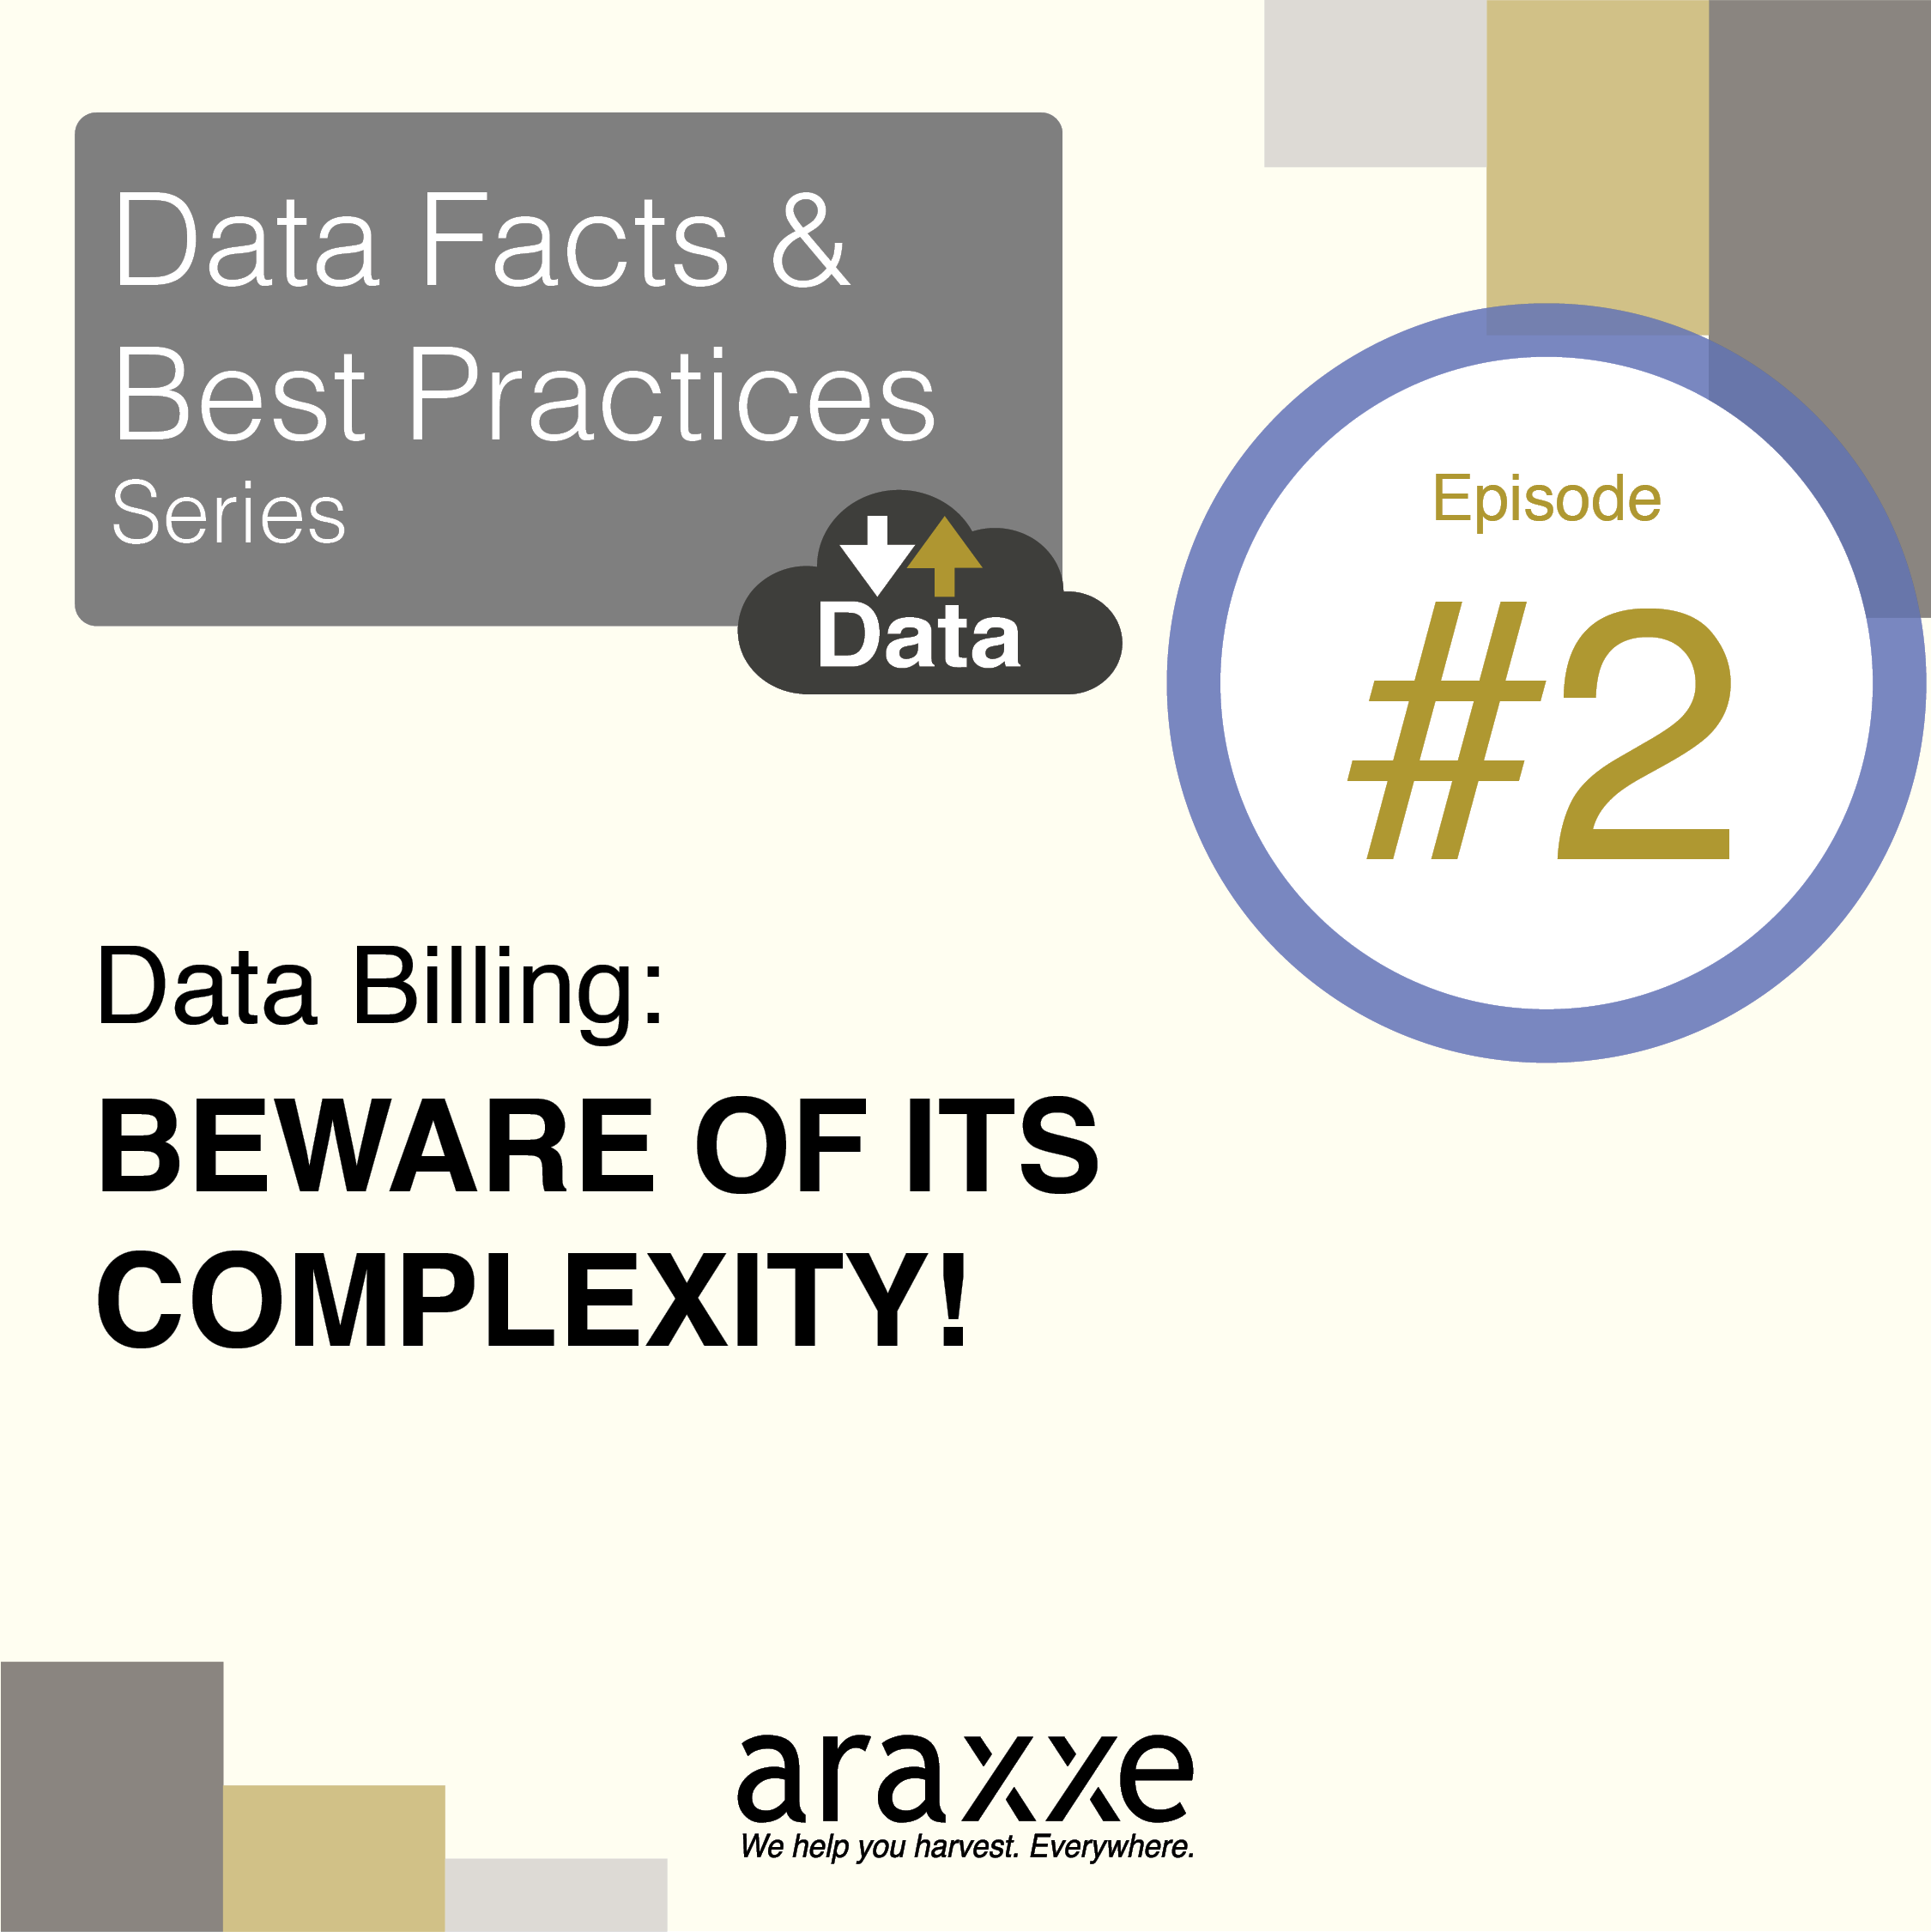 2.	Data billing: beware of its complexity